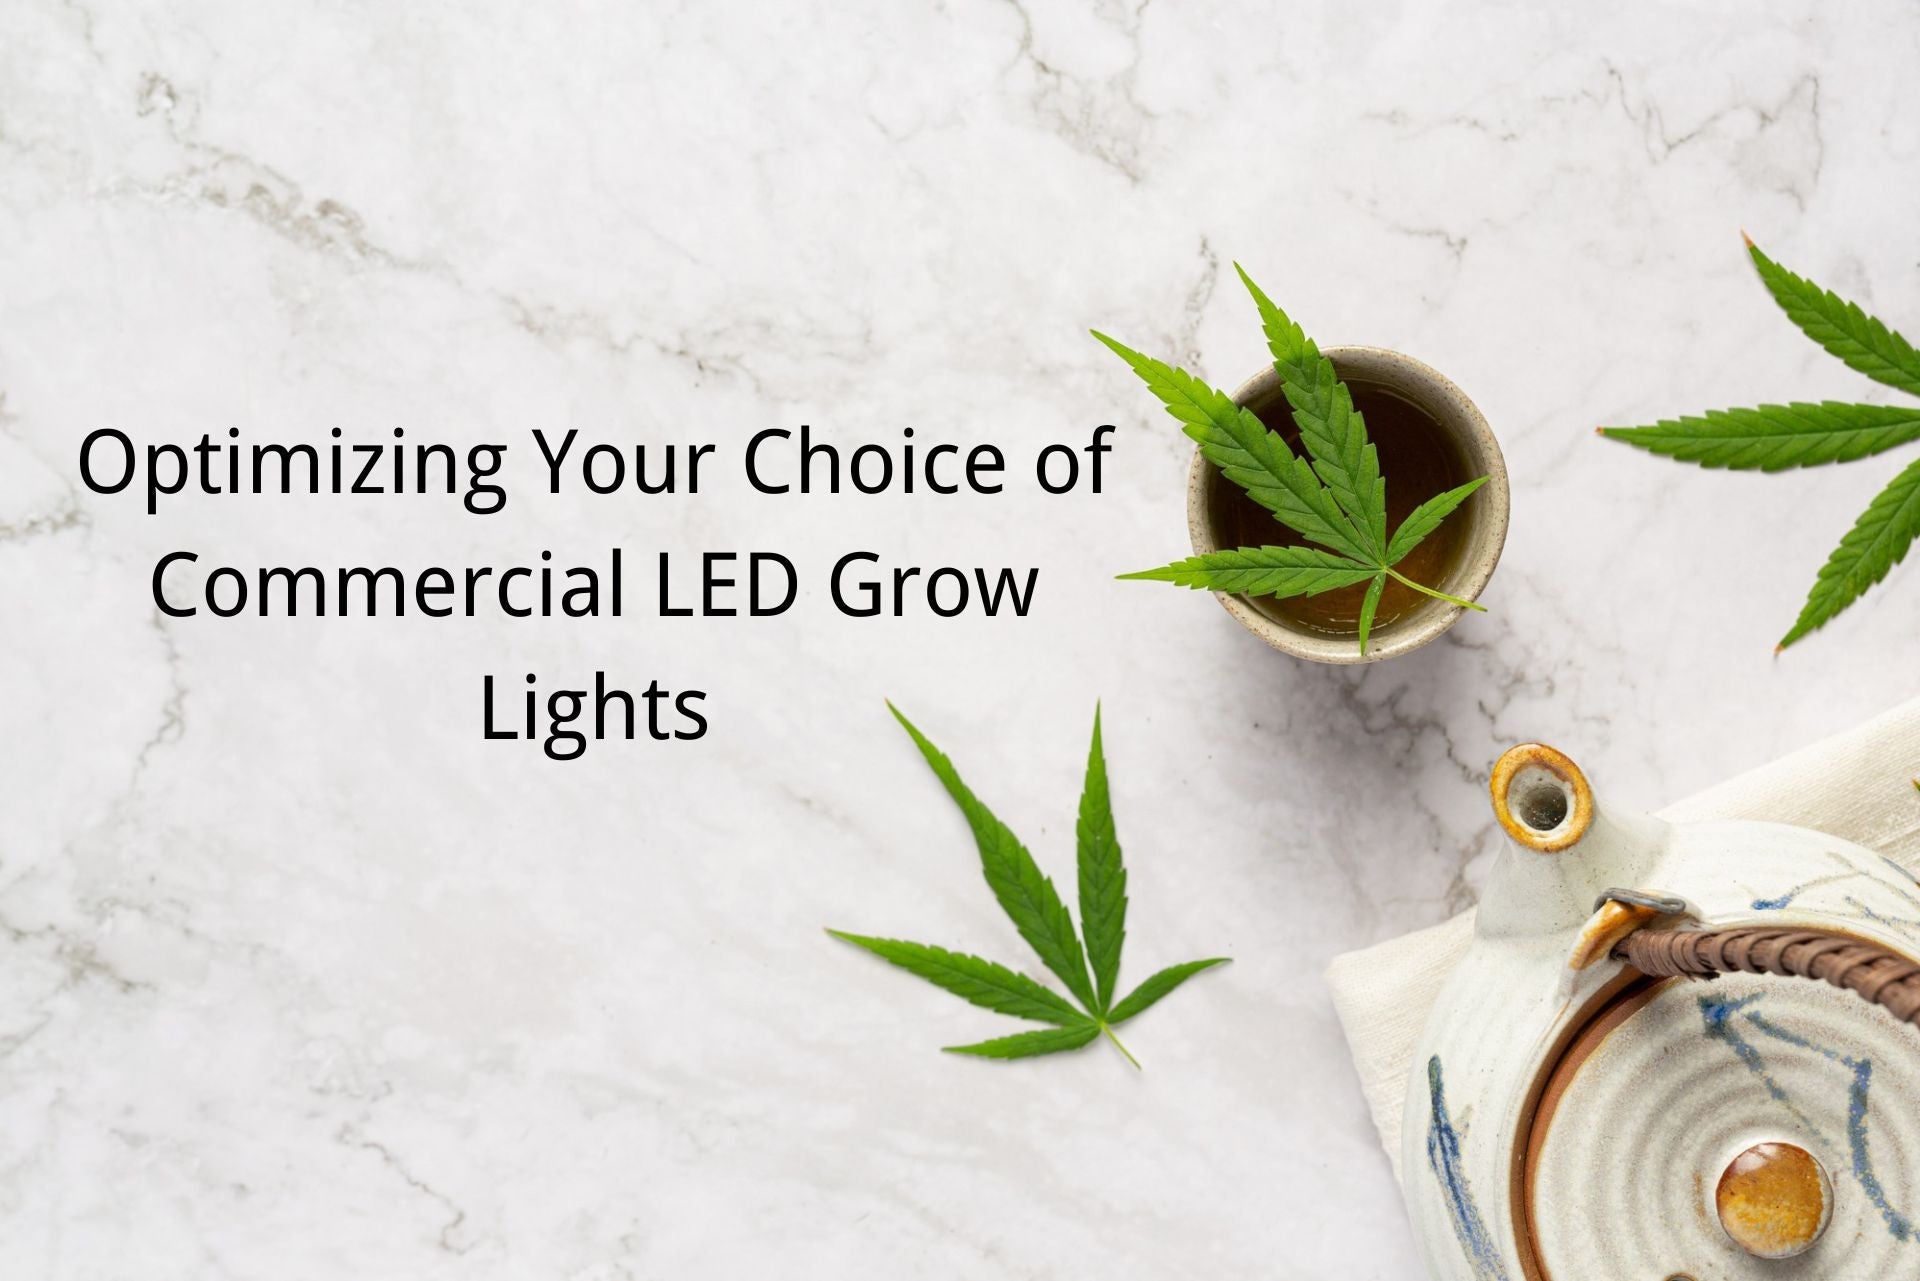 Optimizing Your Choice of Commercial LED Grow Lights